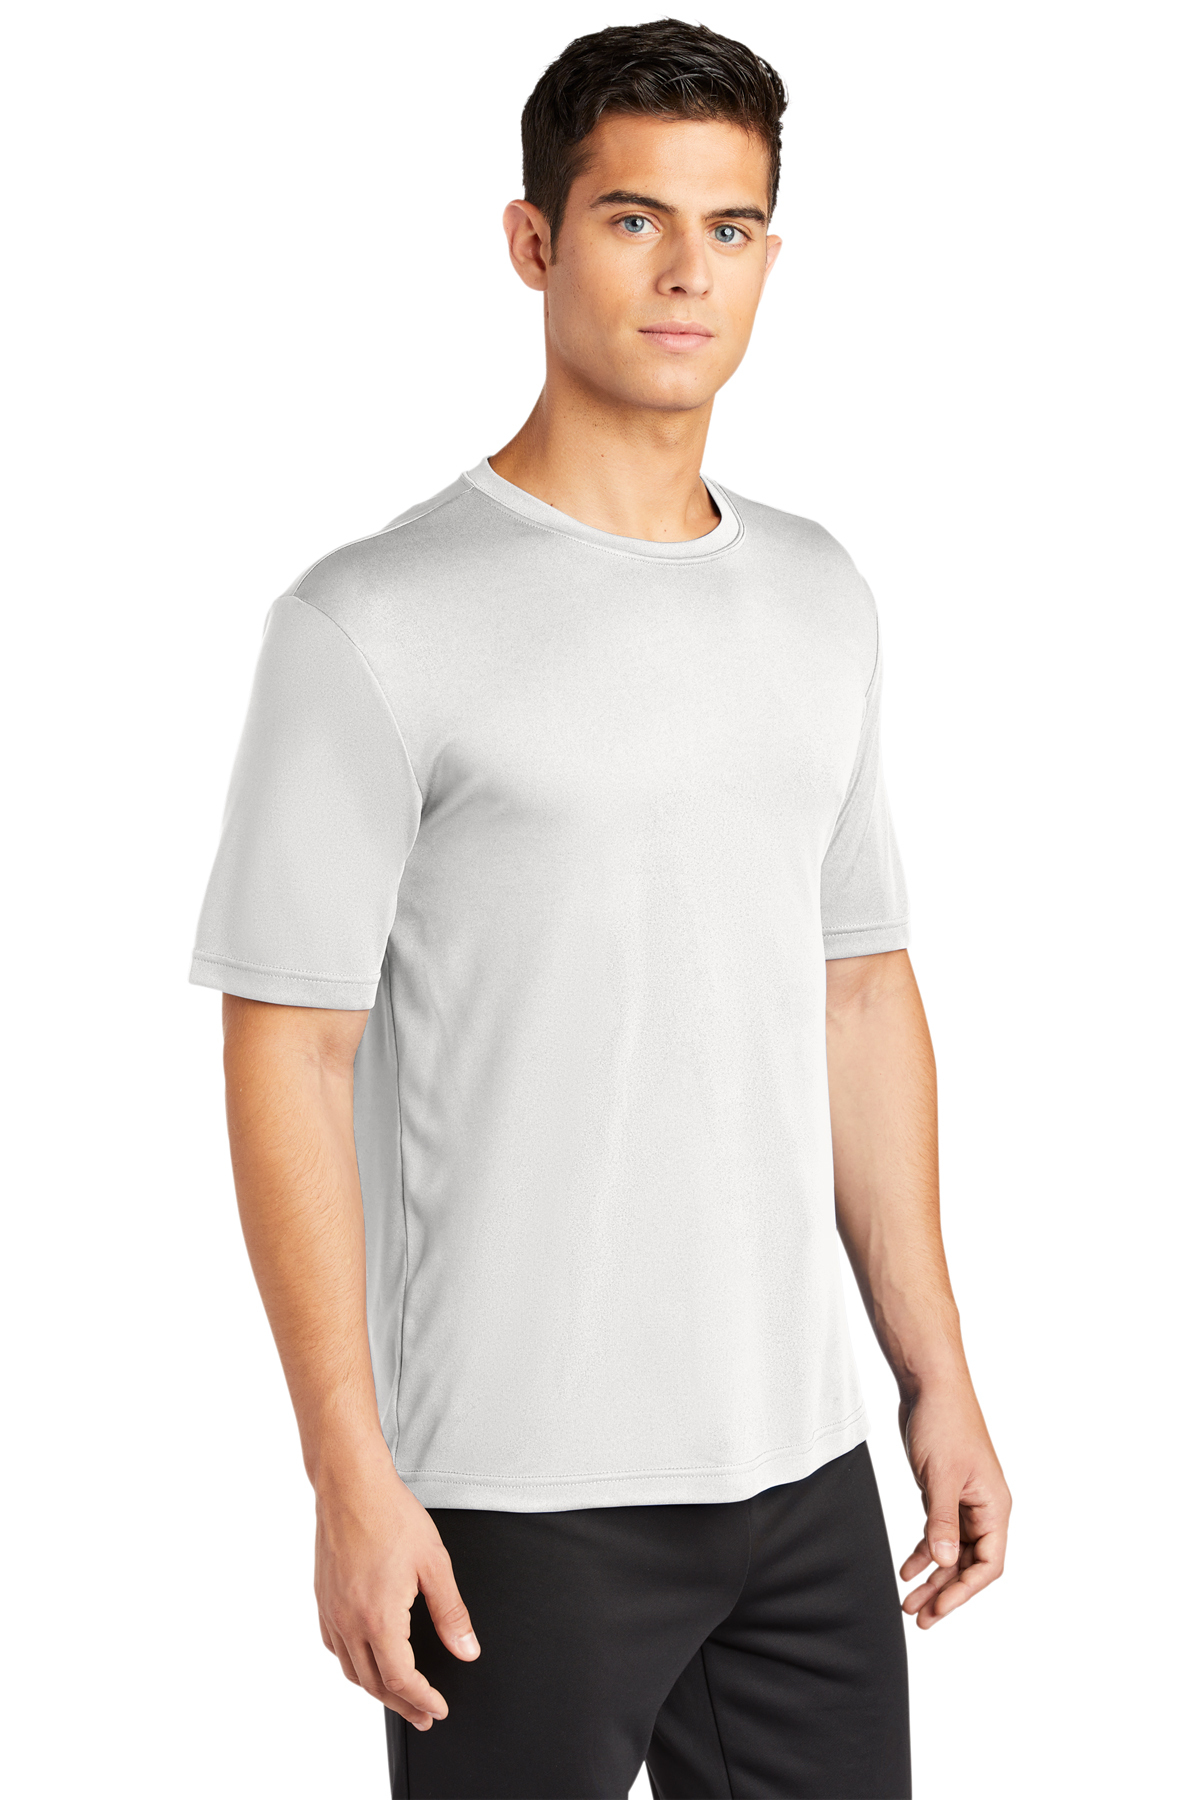 Sport-Tek Tall PosiCharge Competitor™ Tee | Product | SanMar